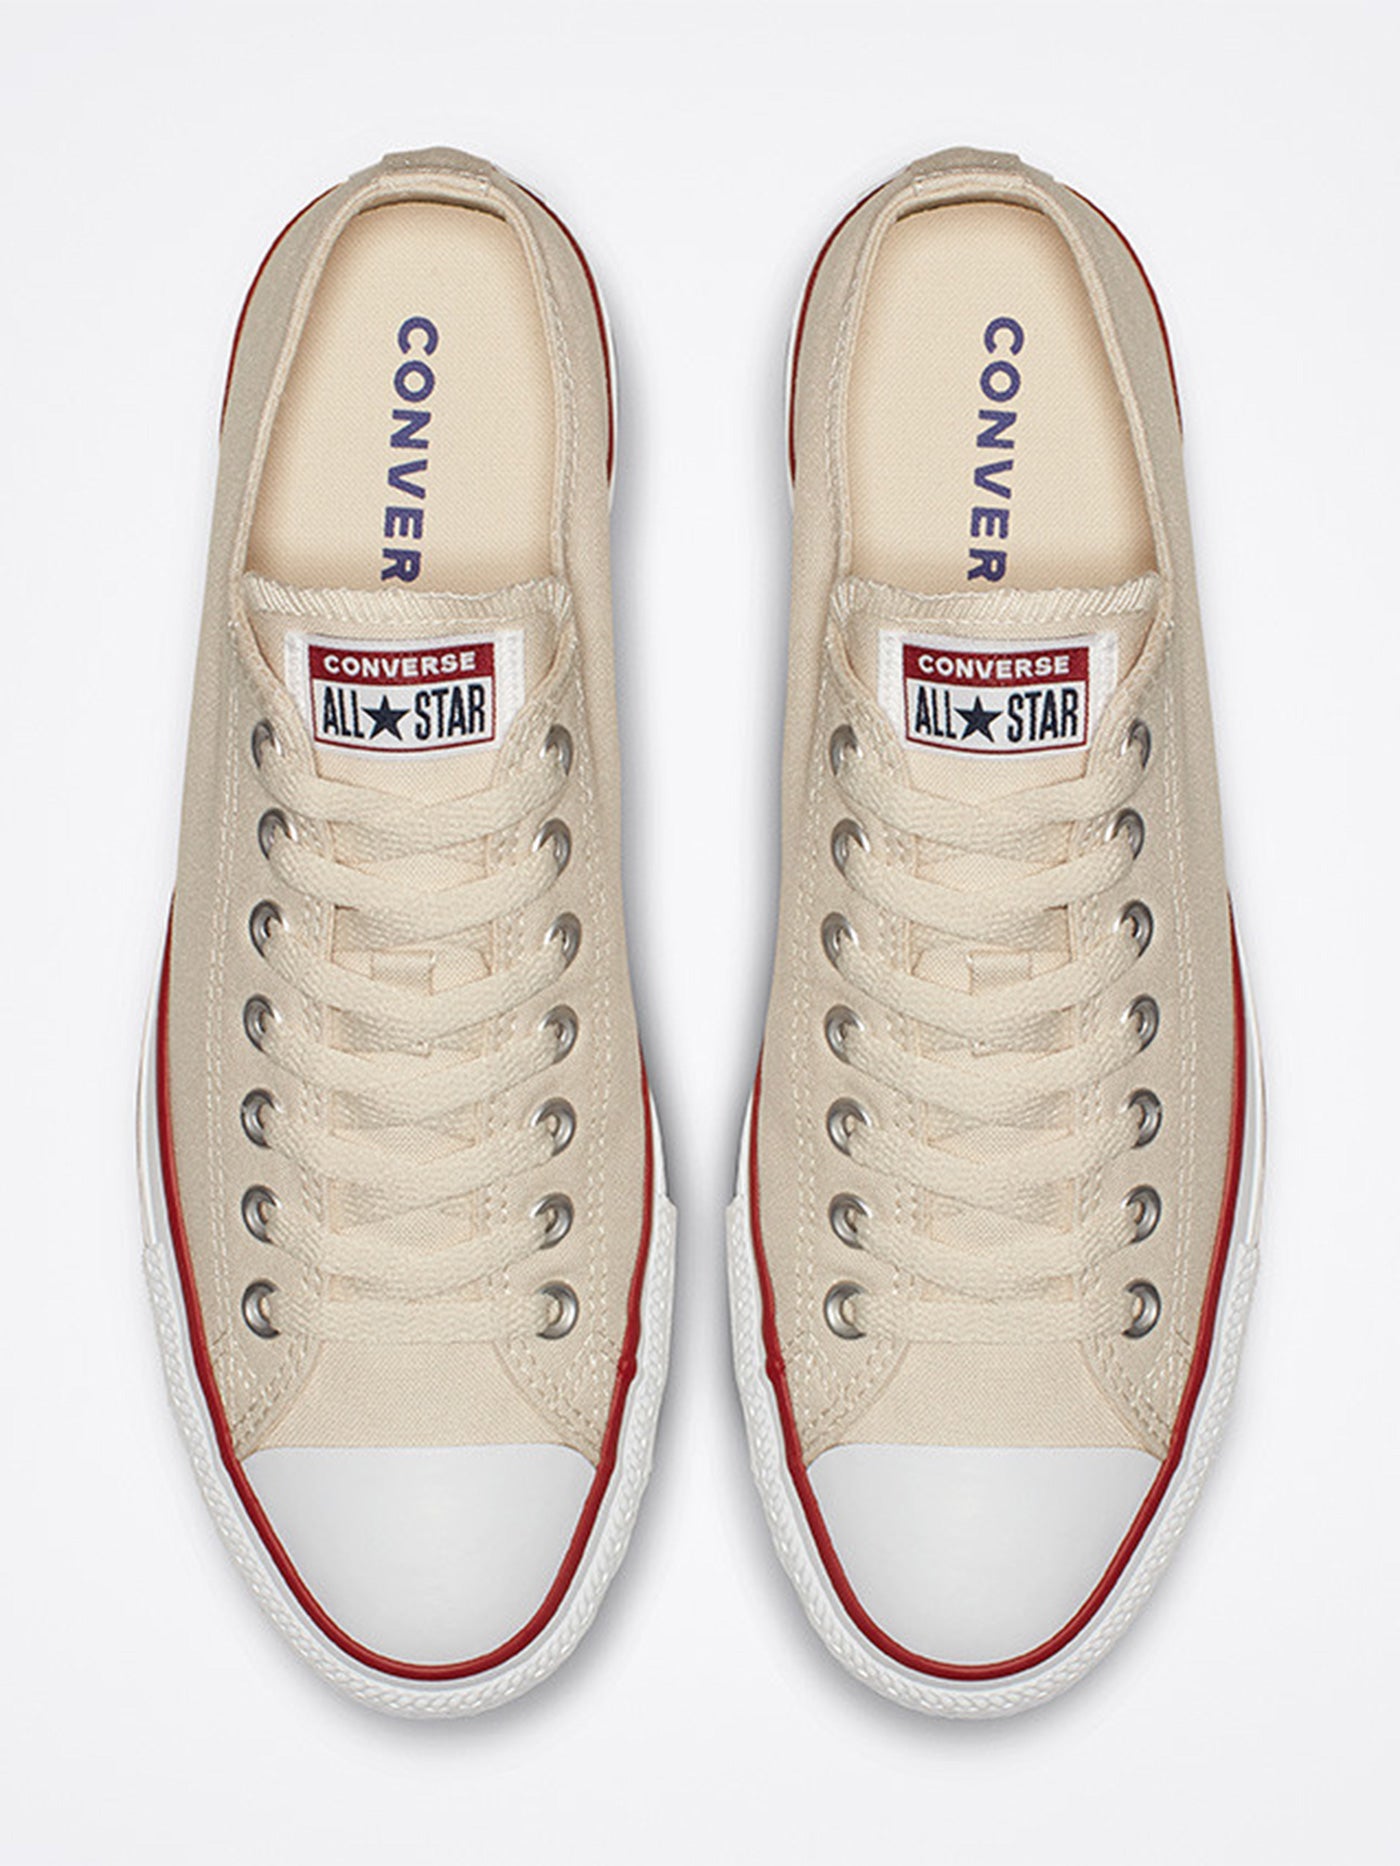 Converse Chuck Taylor All Star Low Top Natural Ivory Shoes